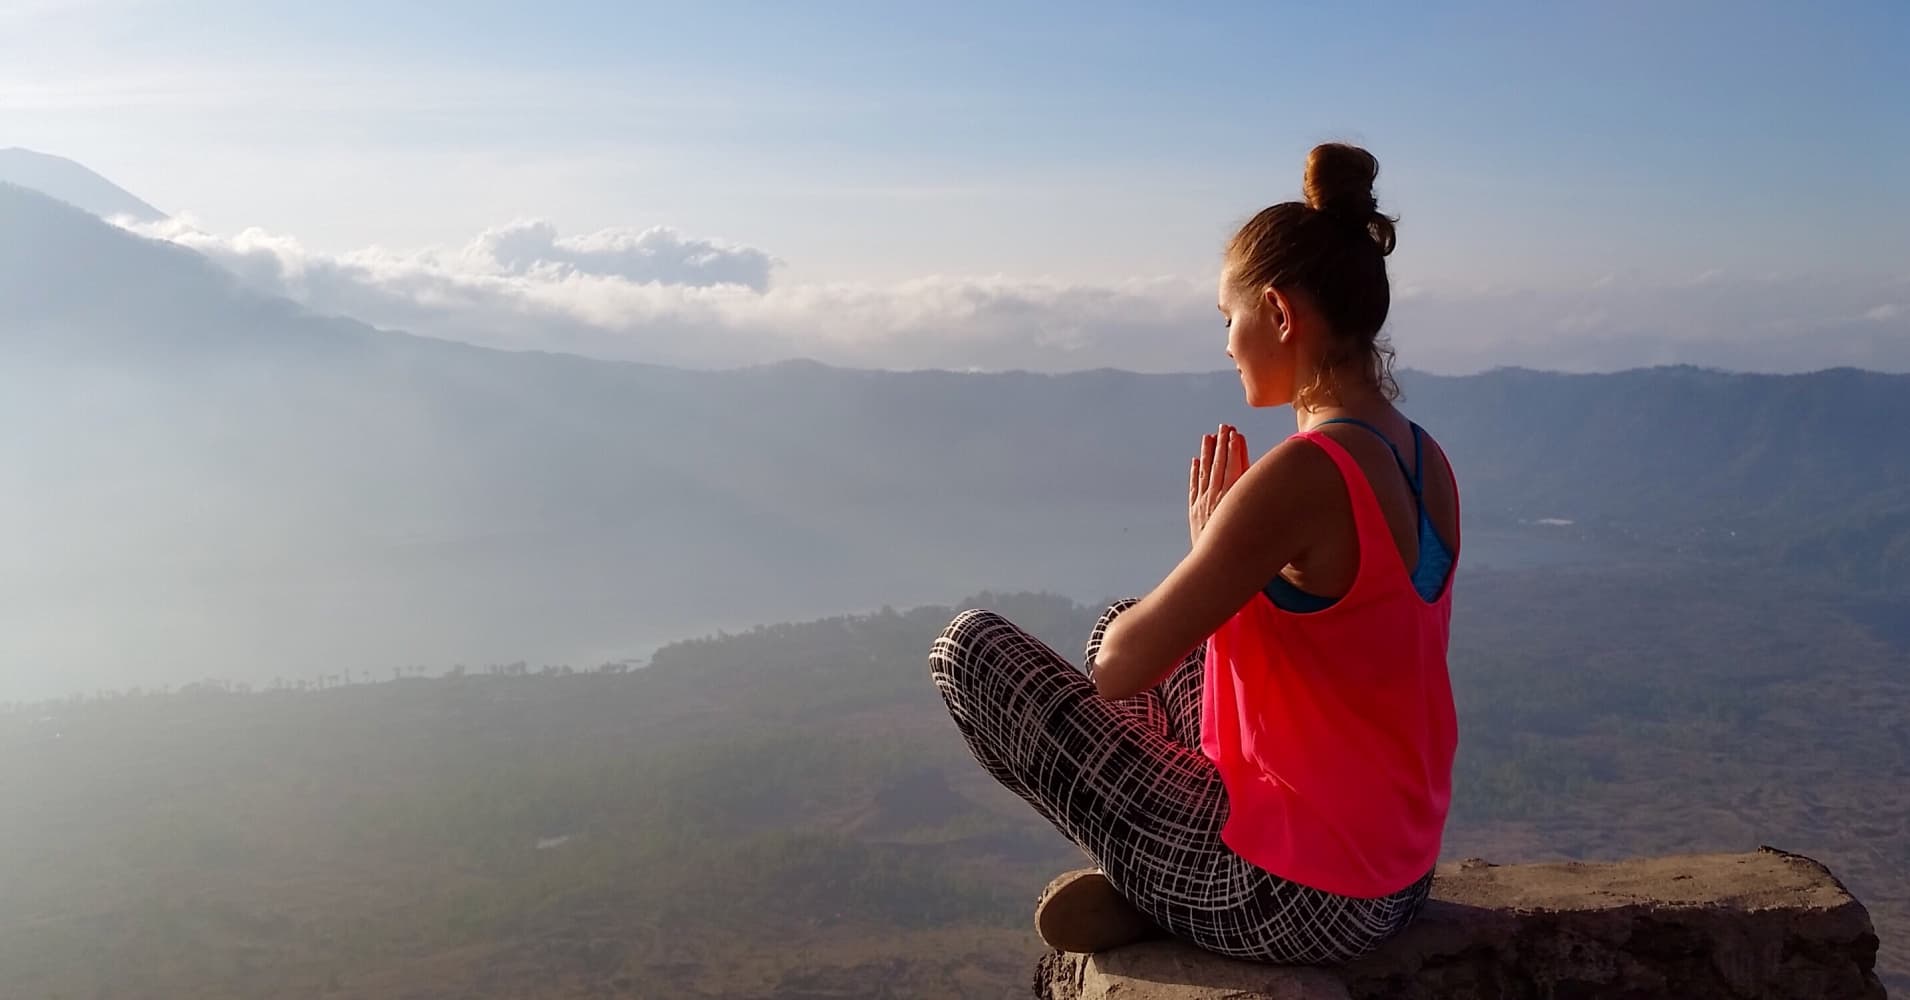 Meditation at the sunrise at the top of mount Batur in Bali, Indonesia